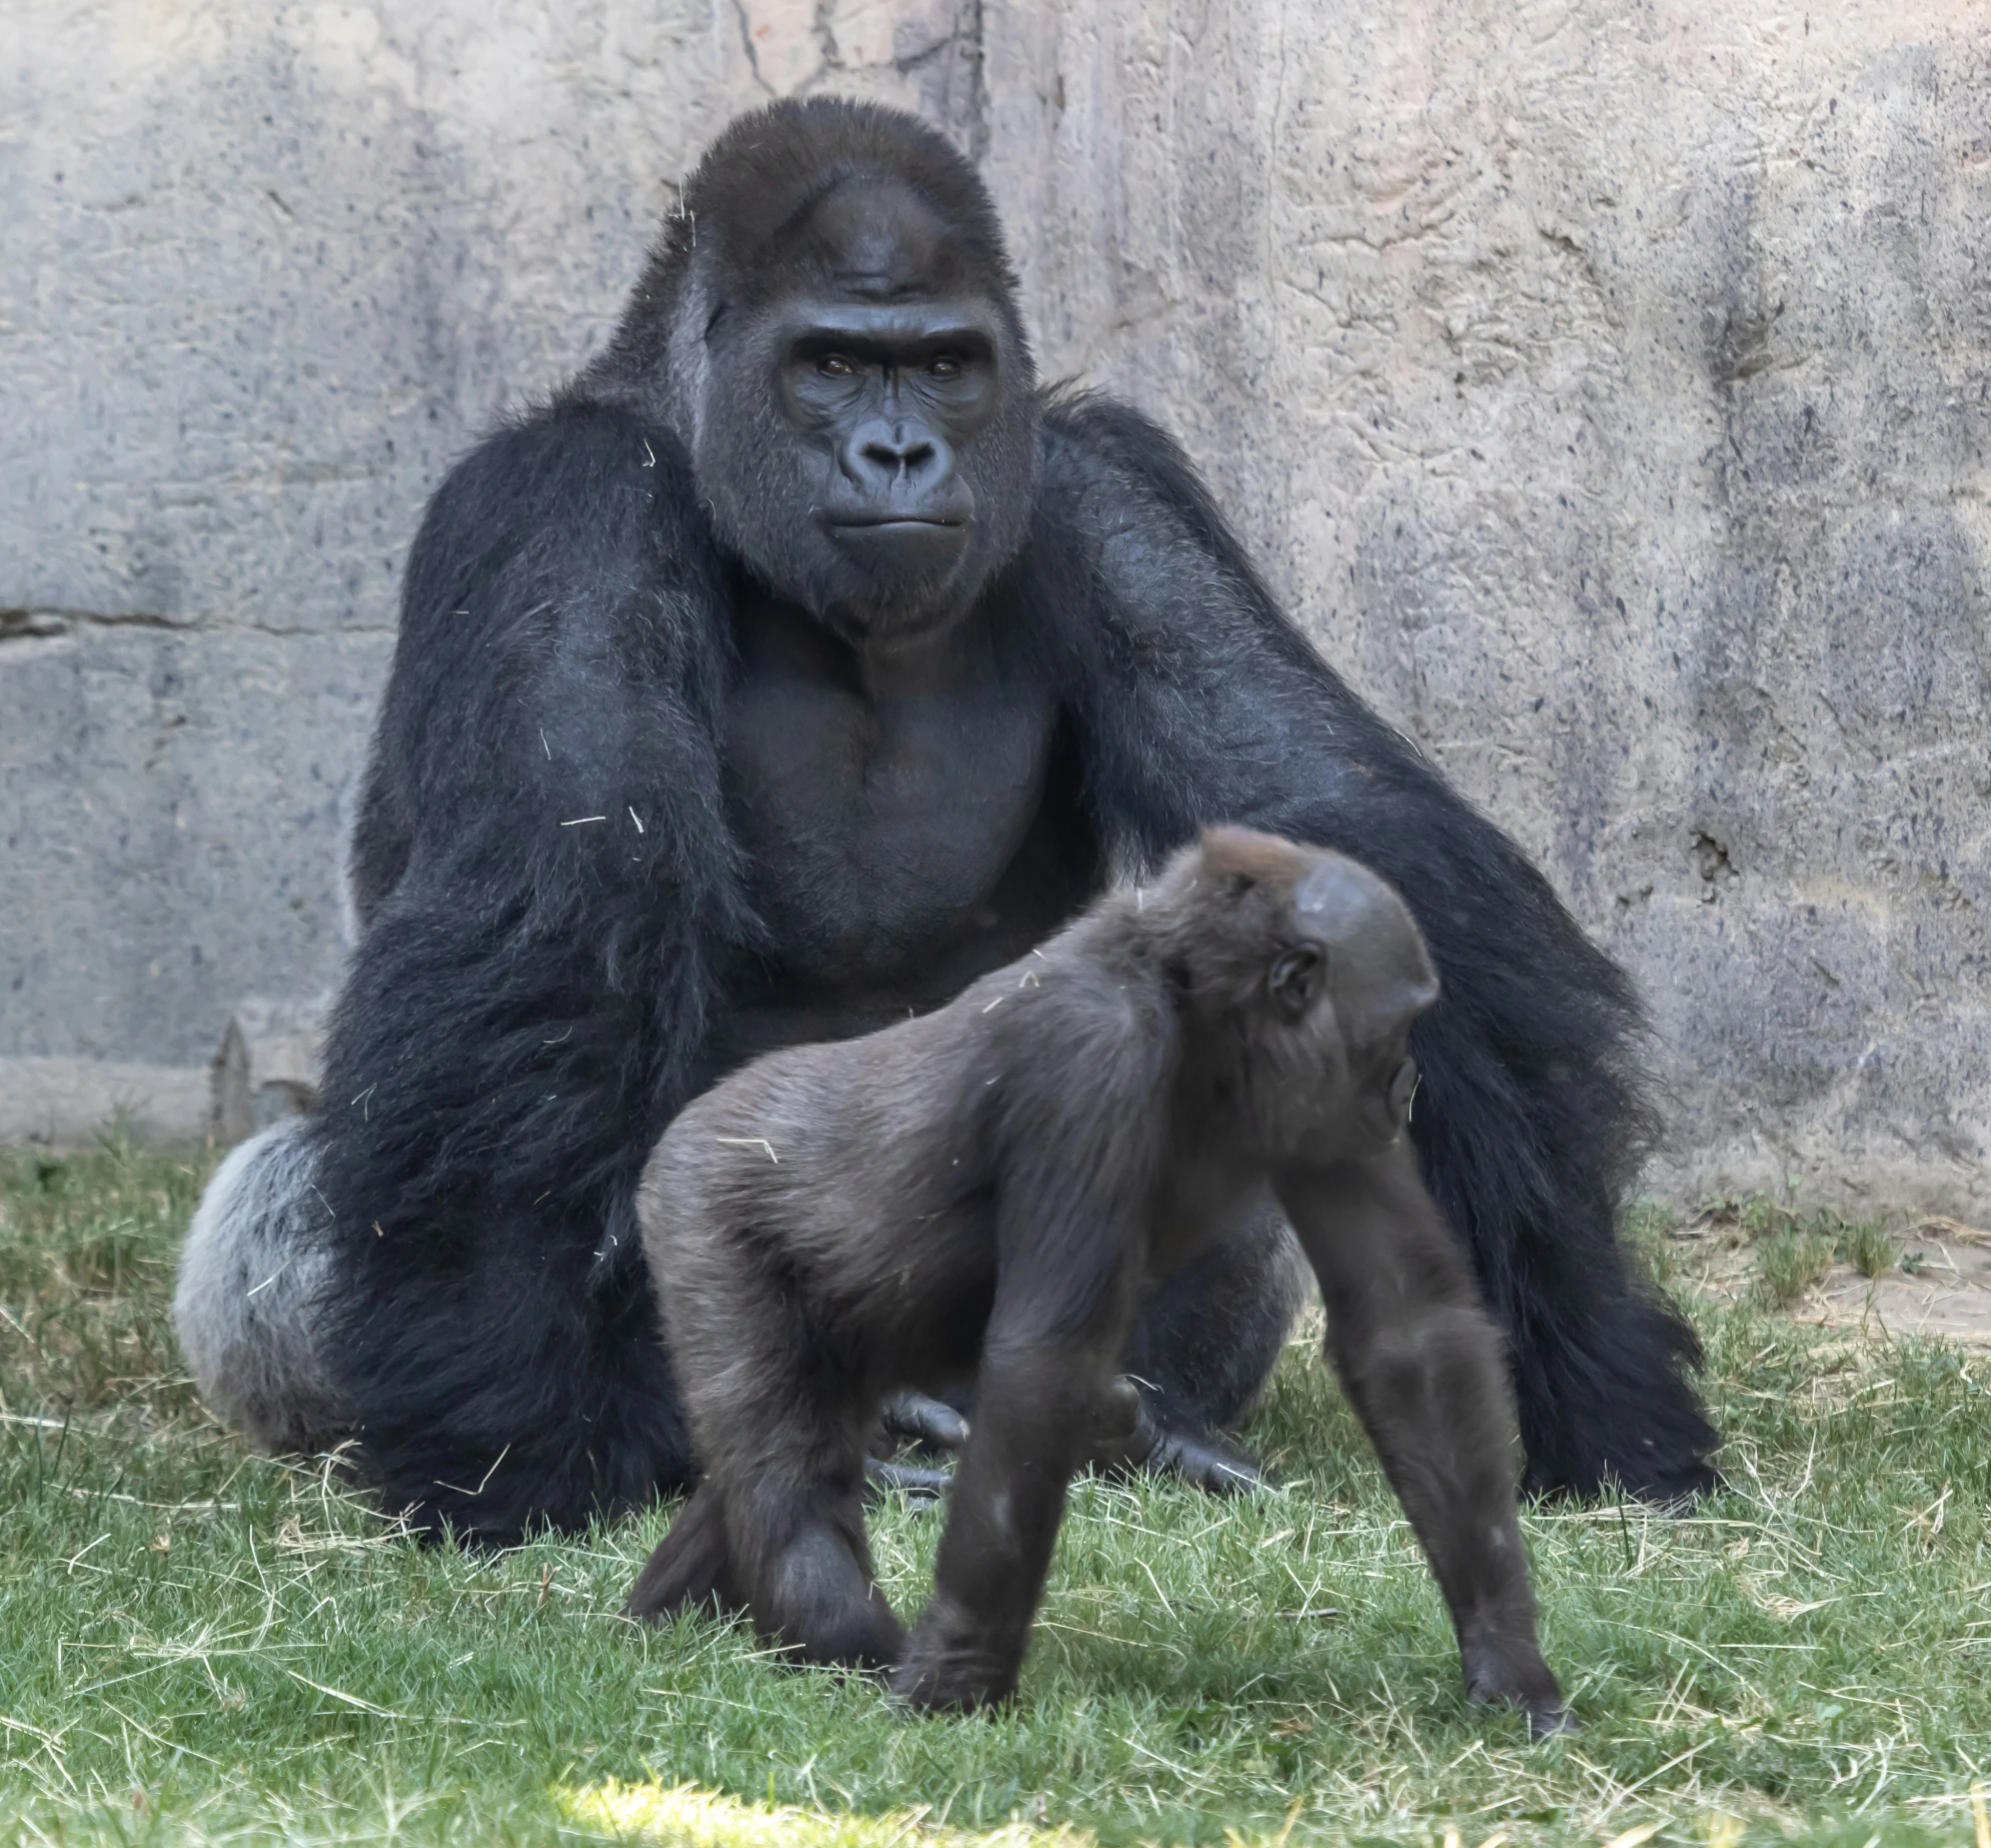 a gorilla standing next to a baby in a field